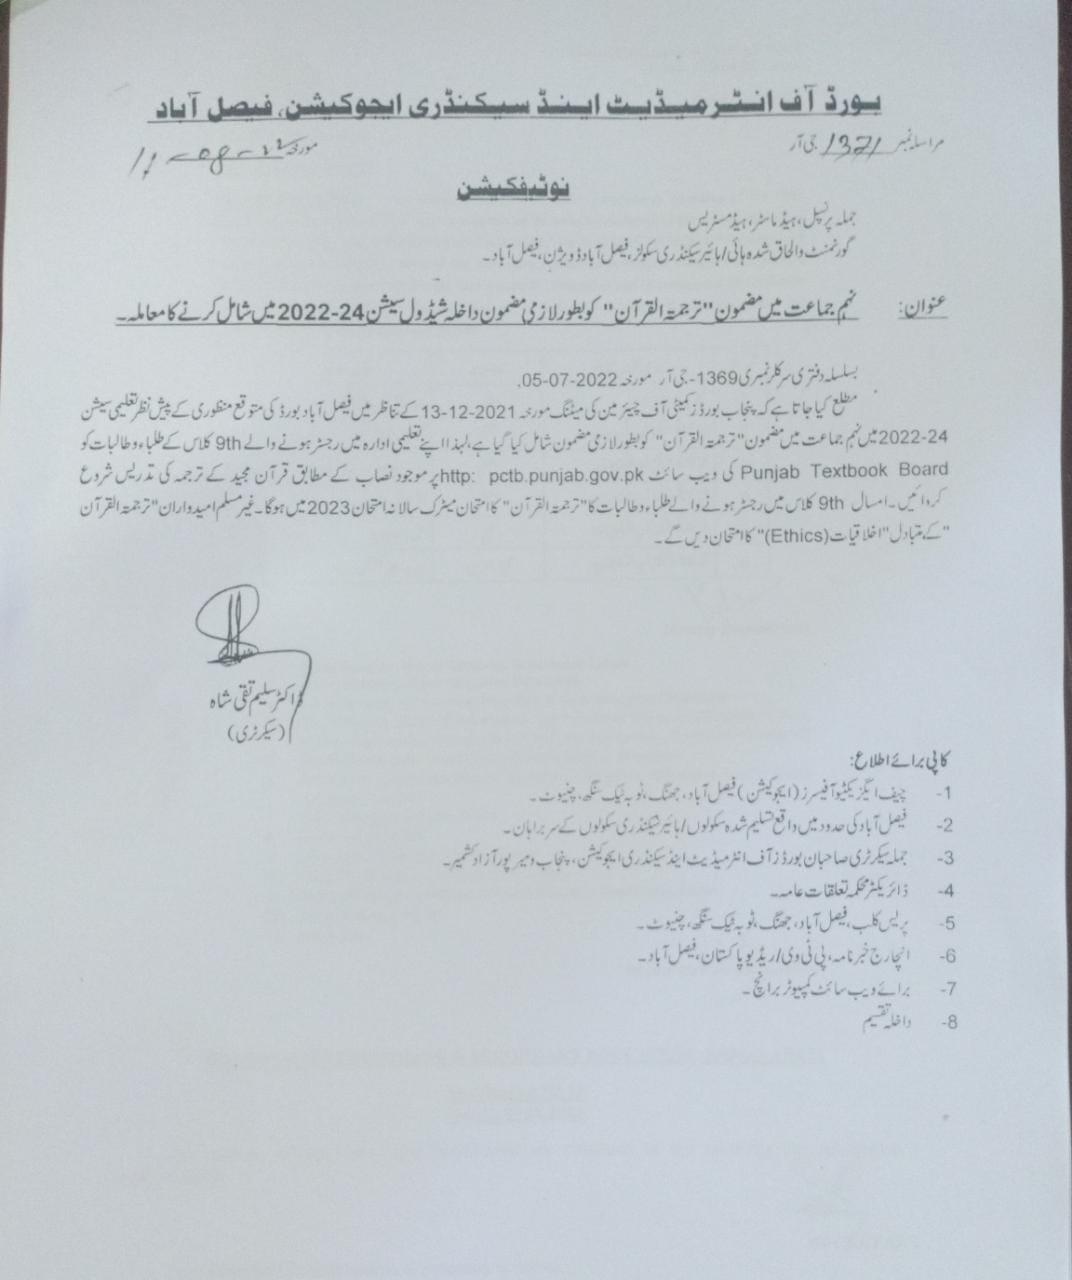 BISE FSD Tarjma-tul-Quran as Compulsory Subject for 9th